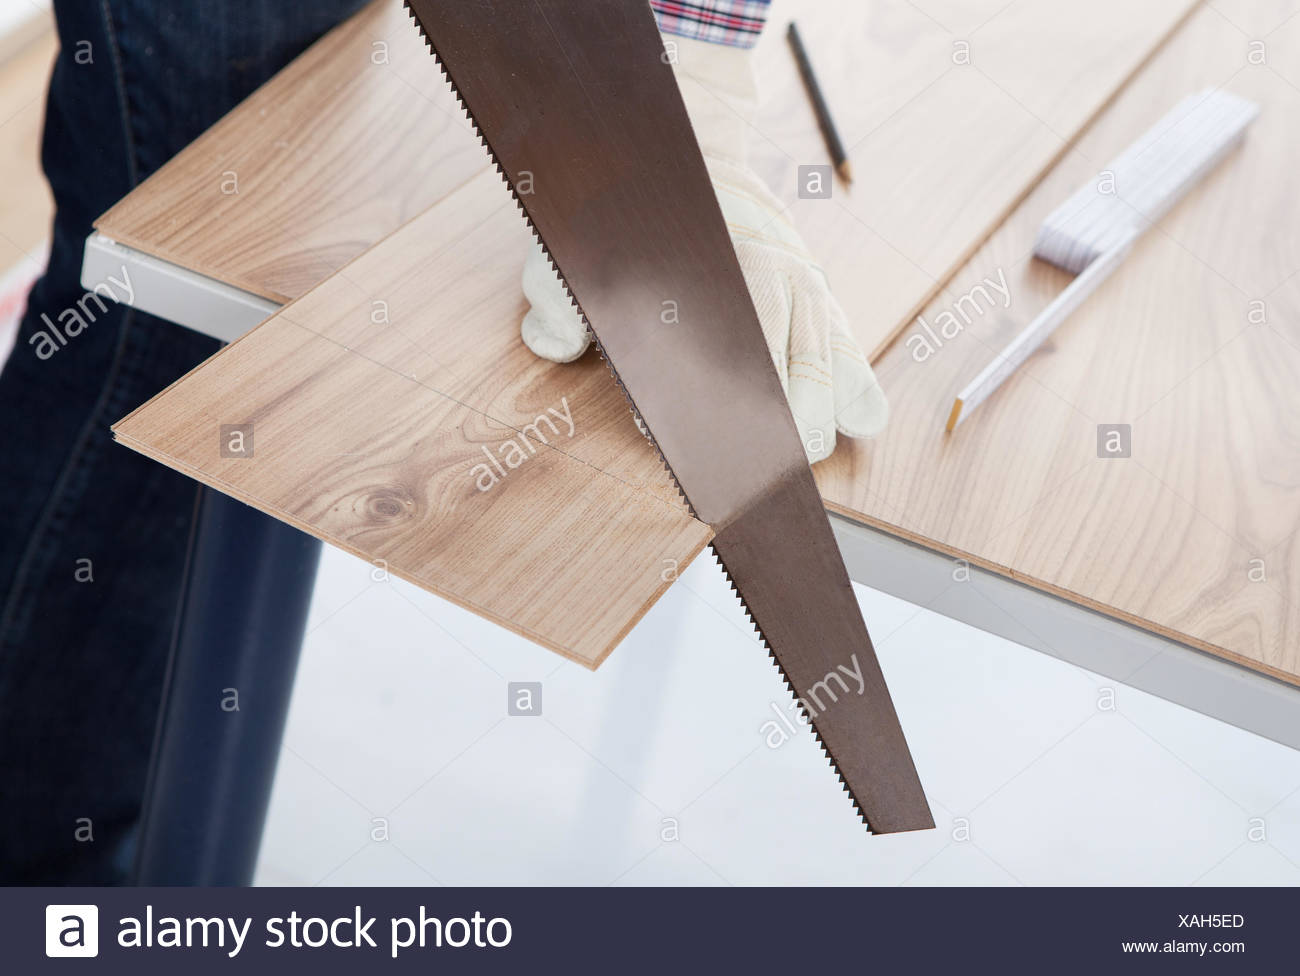 Worker Cutting Piece Of Laminate Using Hand Saw Stock Photo